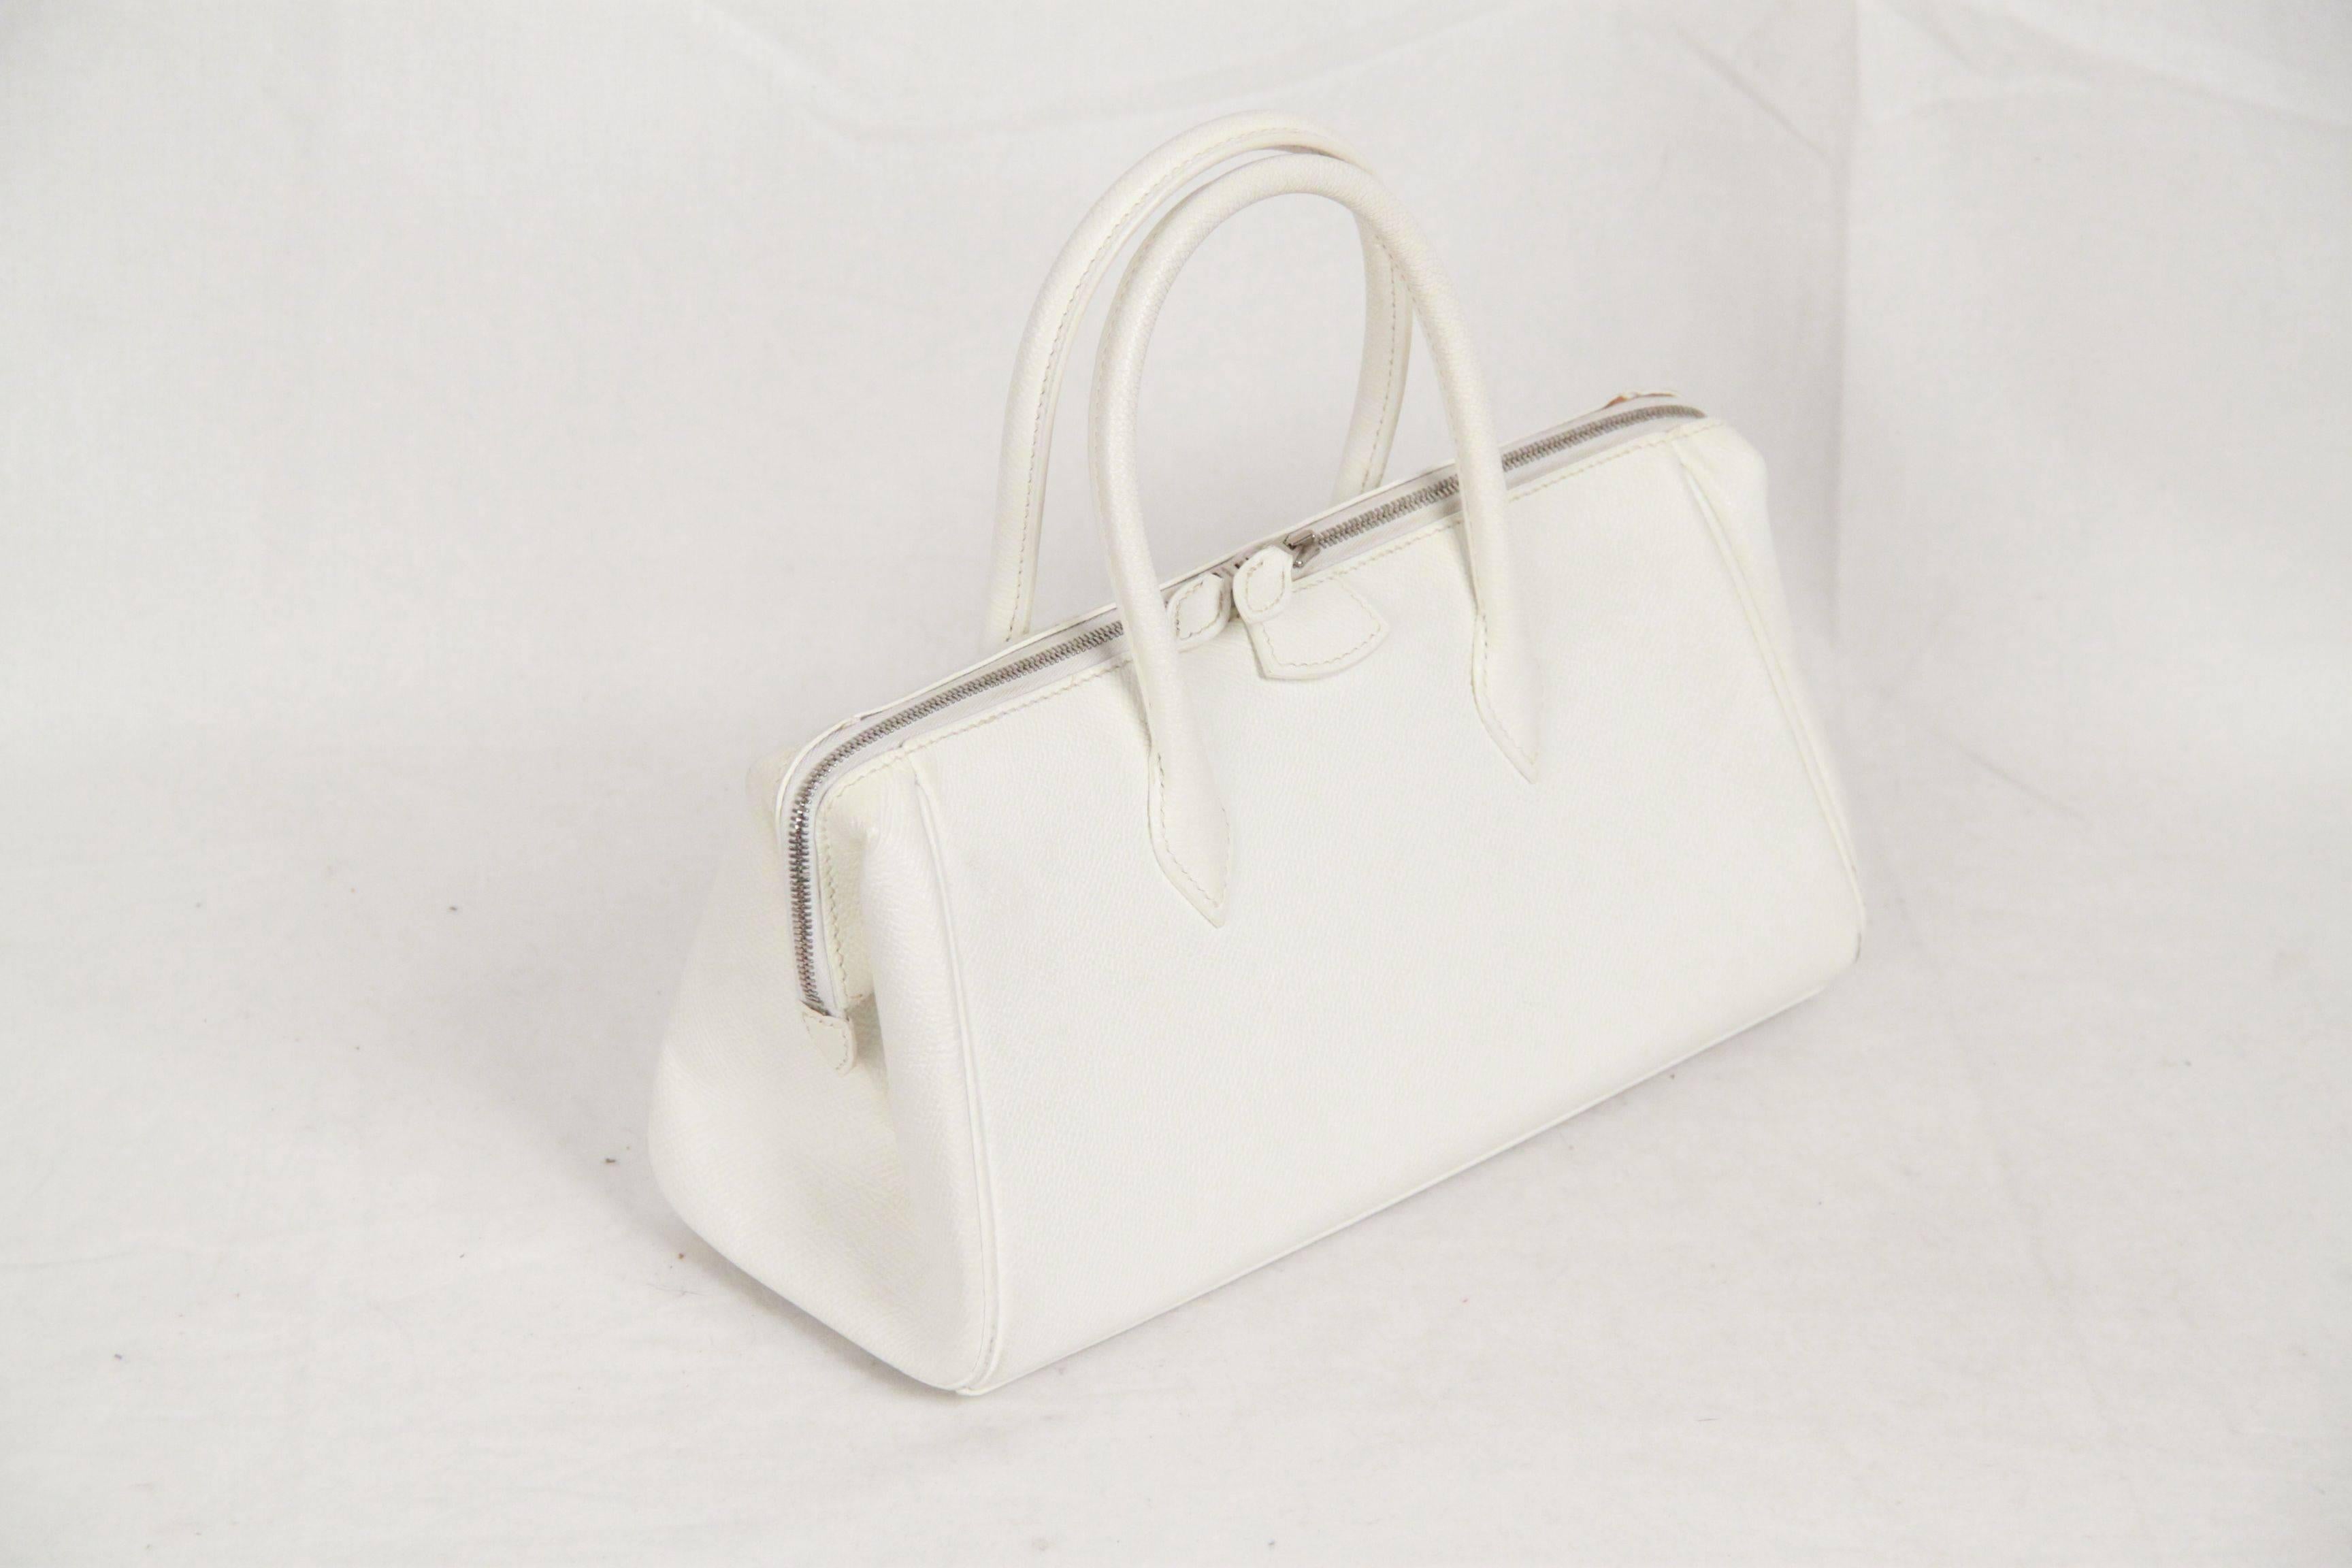 - Hermes 'Paris-Bombay' handbag 
- White leather 
- Two handles
- Double zipper closure
- Leather lining
- 2 pockets inside
- 4 bottom feet 
- Made in France
- Stamp J in a Square (2006)
- Measurements(HxLxD): 5.5 x 11 x 4.5 inches - 14 x 28 x 11.5